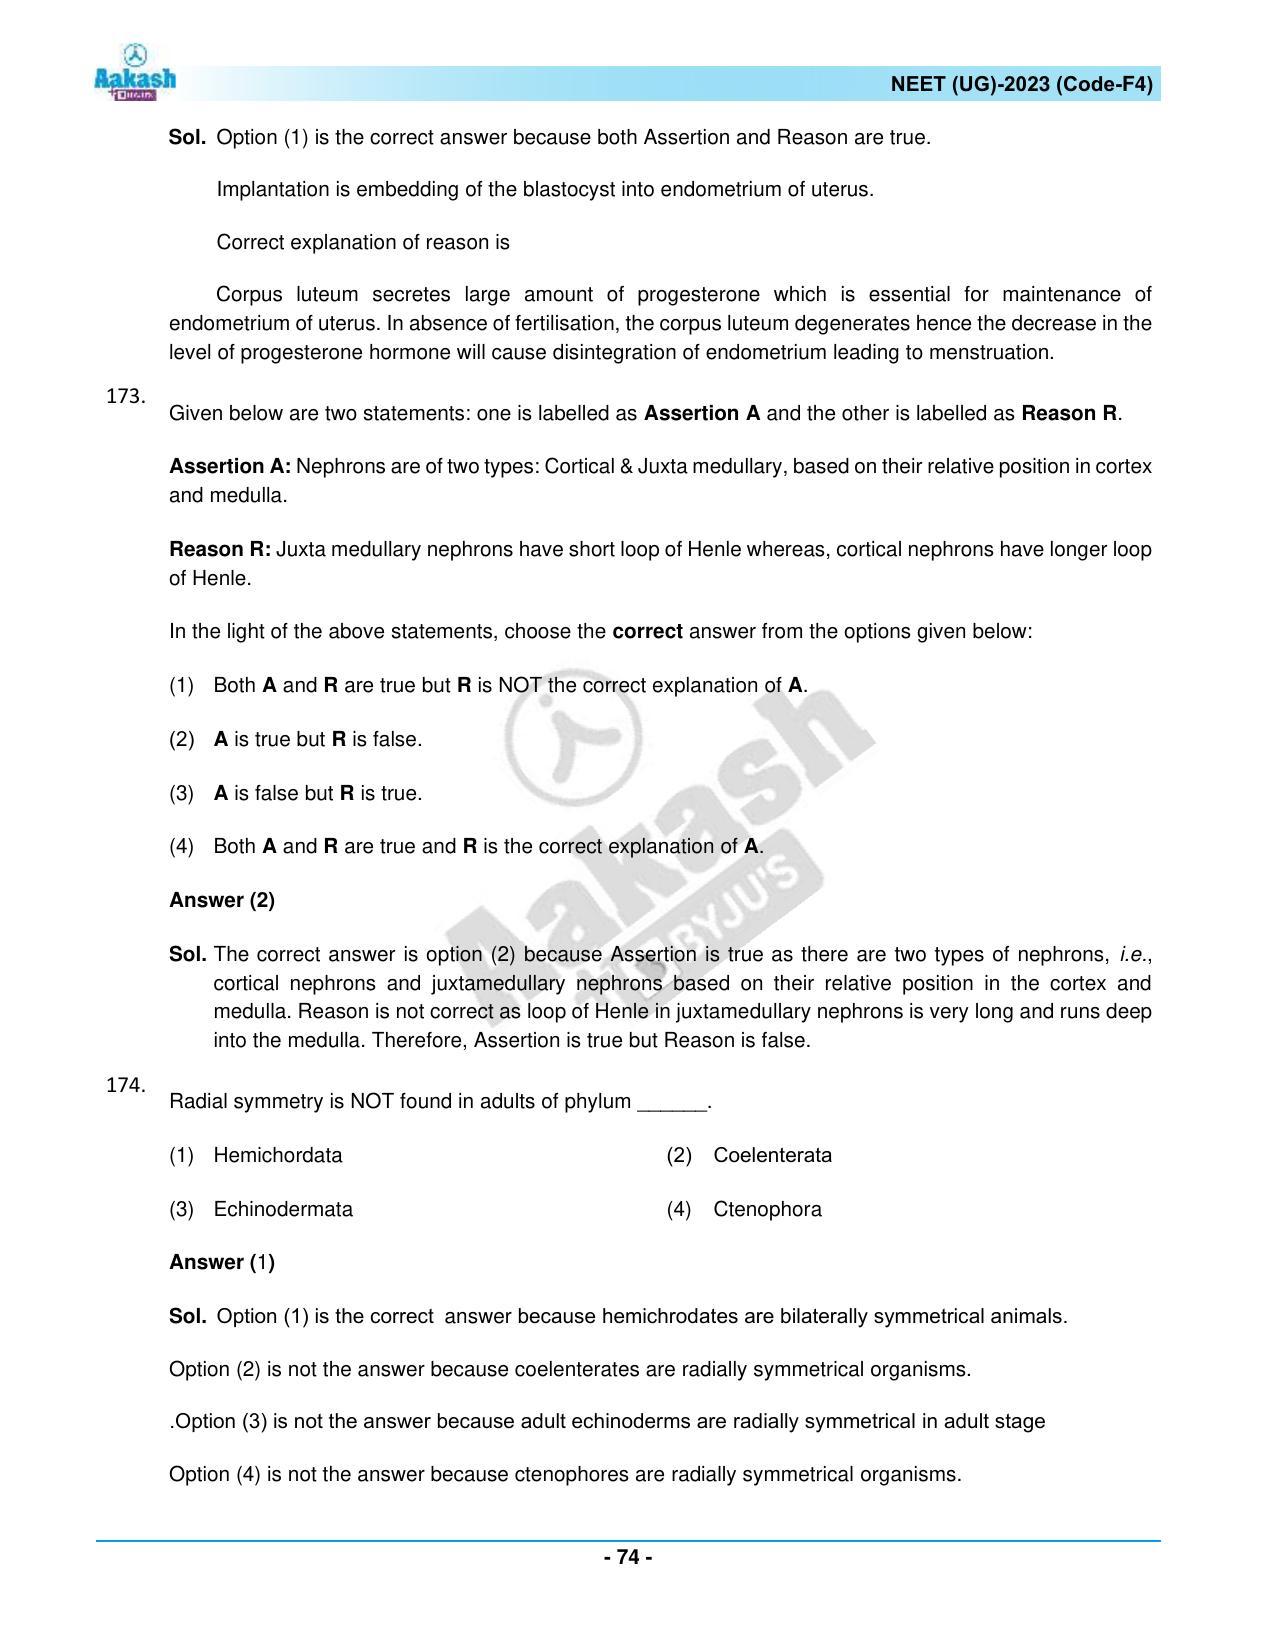 NEET 2023 Question Paper F4 - Page 74